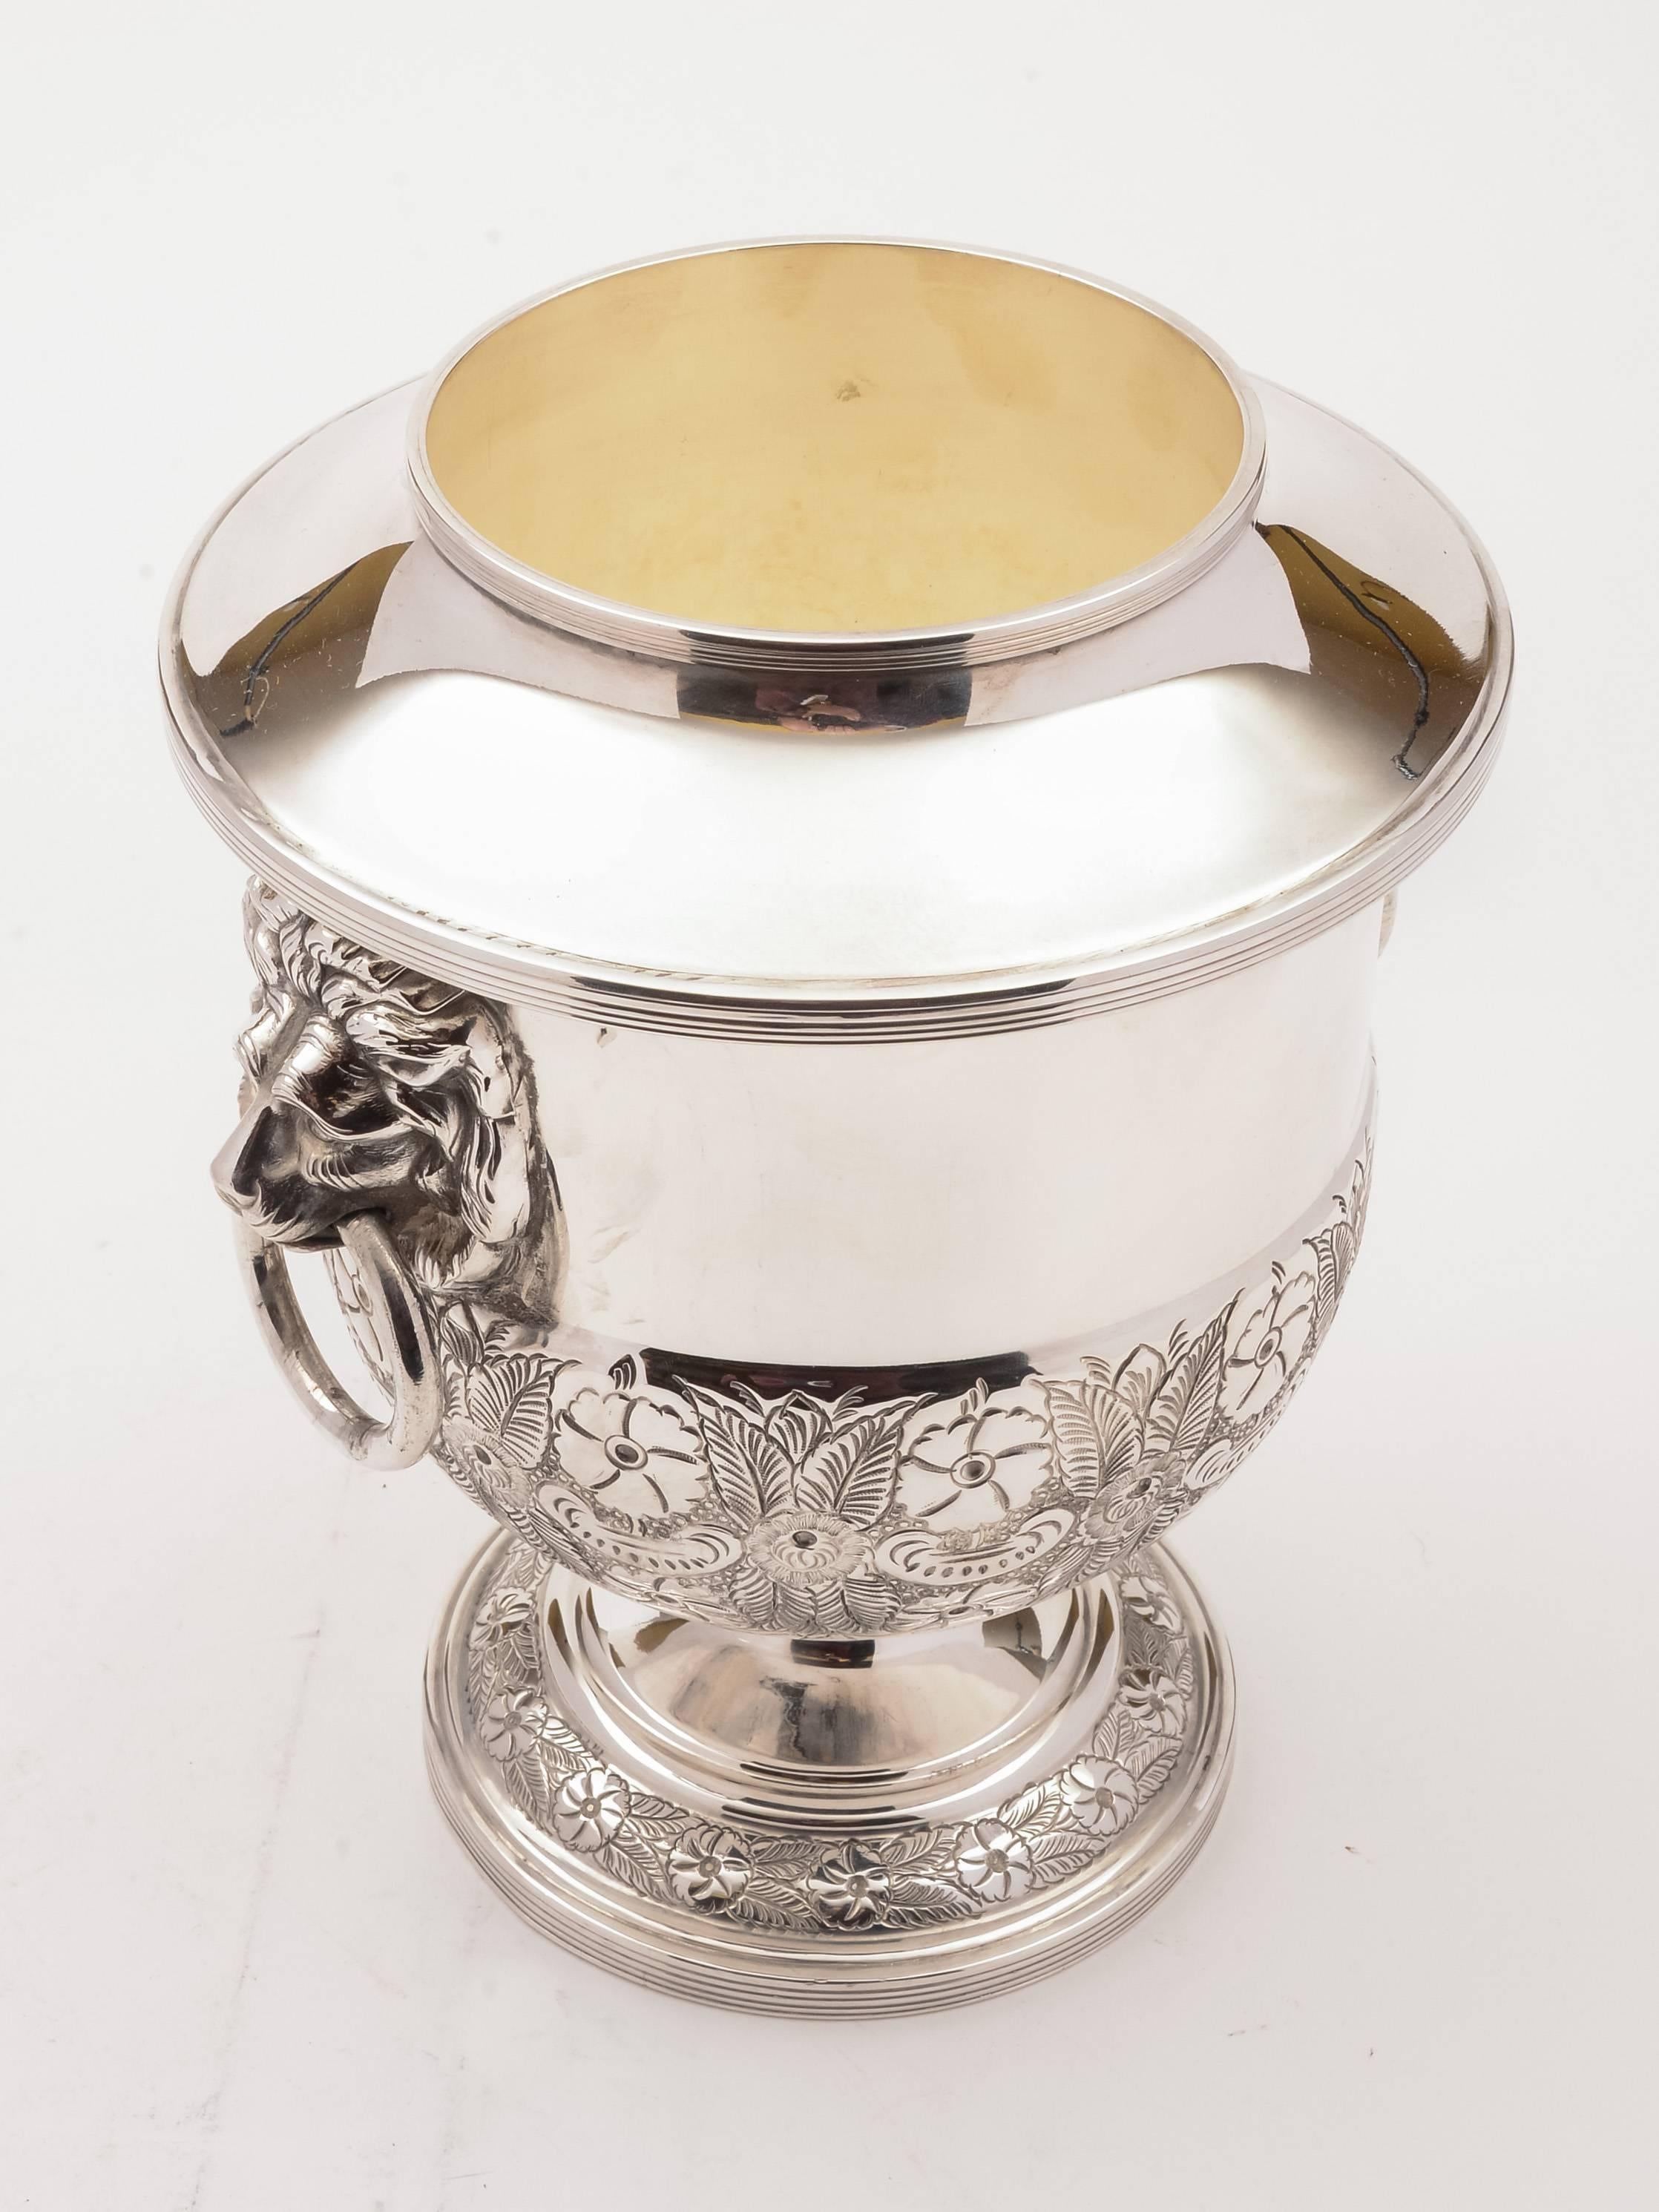 A fabulous English silver plated champagne/wine ice bucket with lion head handles and embossed decoration to base. Has removable liner which holds ice and allows for smaller wine bottles to be used. Circa 1920.

FREE worldwide delivery.